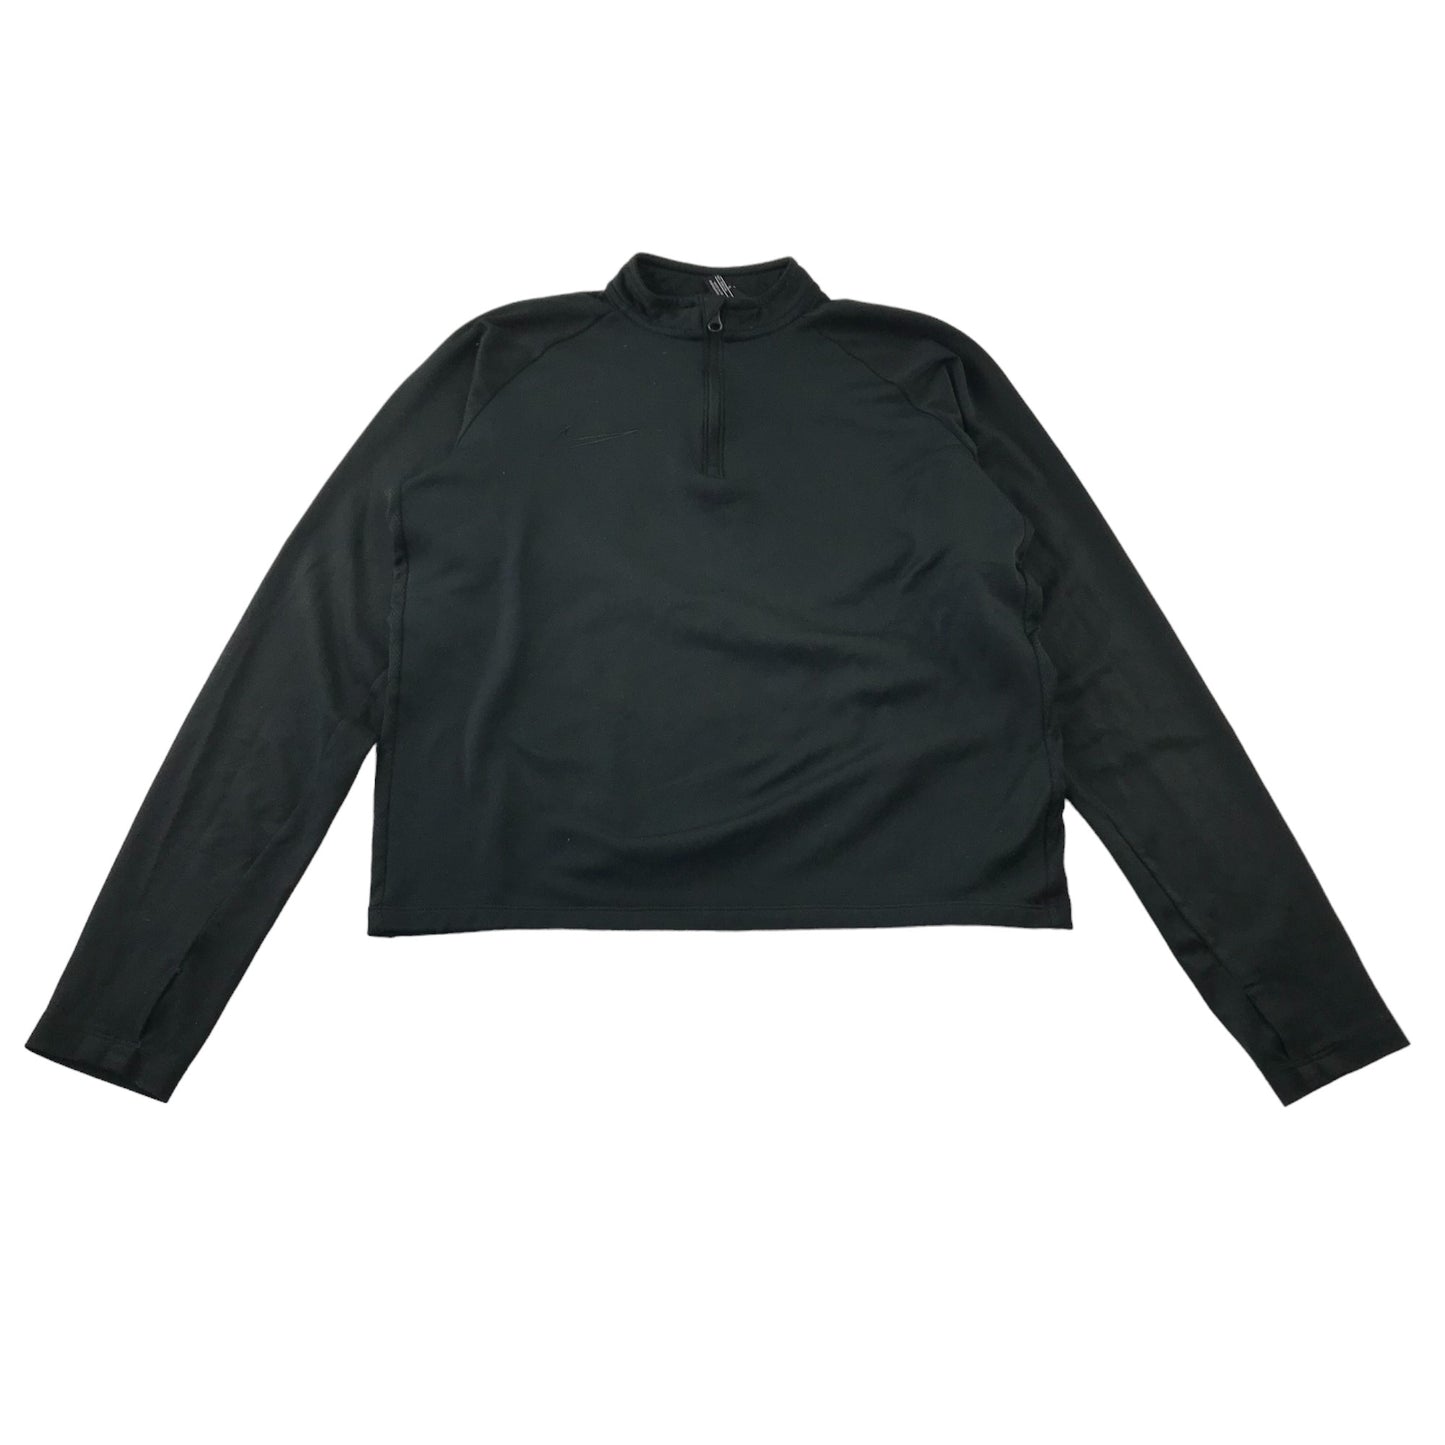 Nike Sweater Age 11-13 Black Cropped Long Sleeve Sporty Top